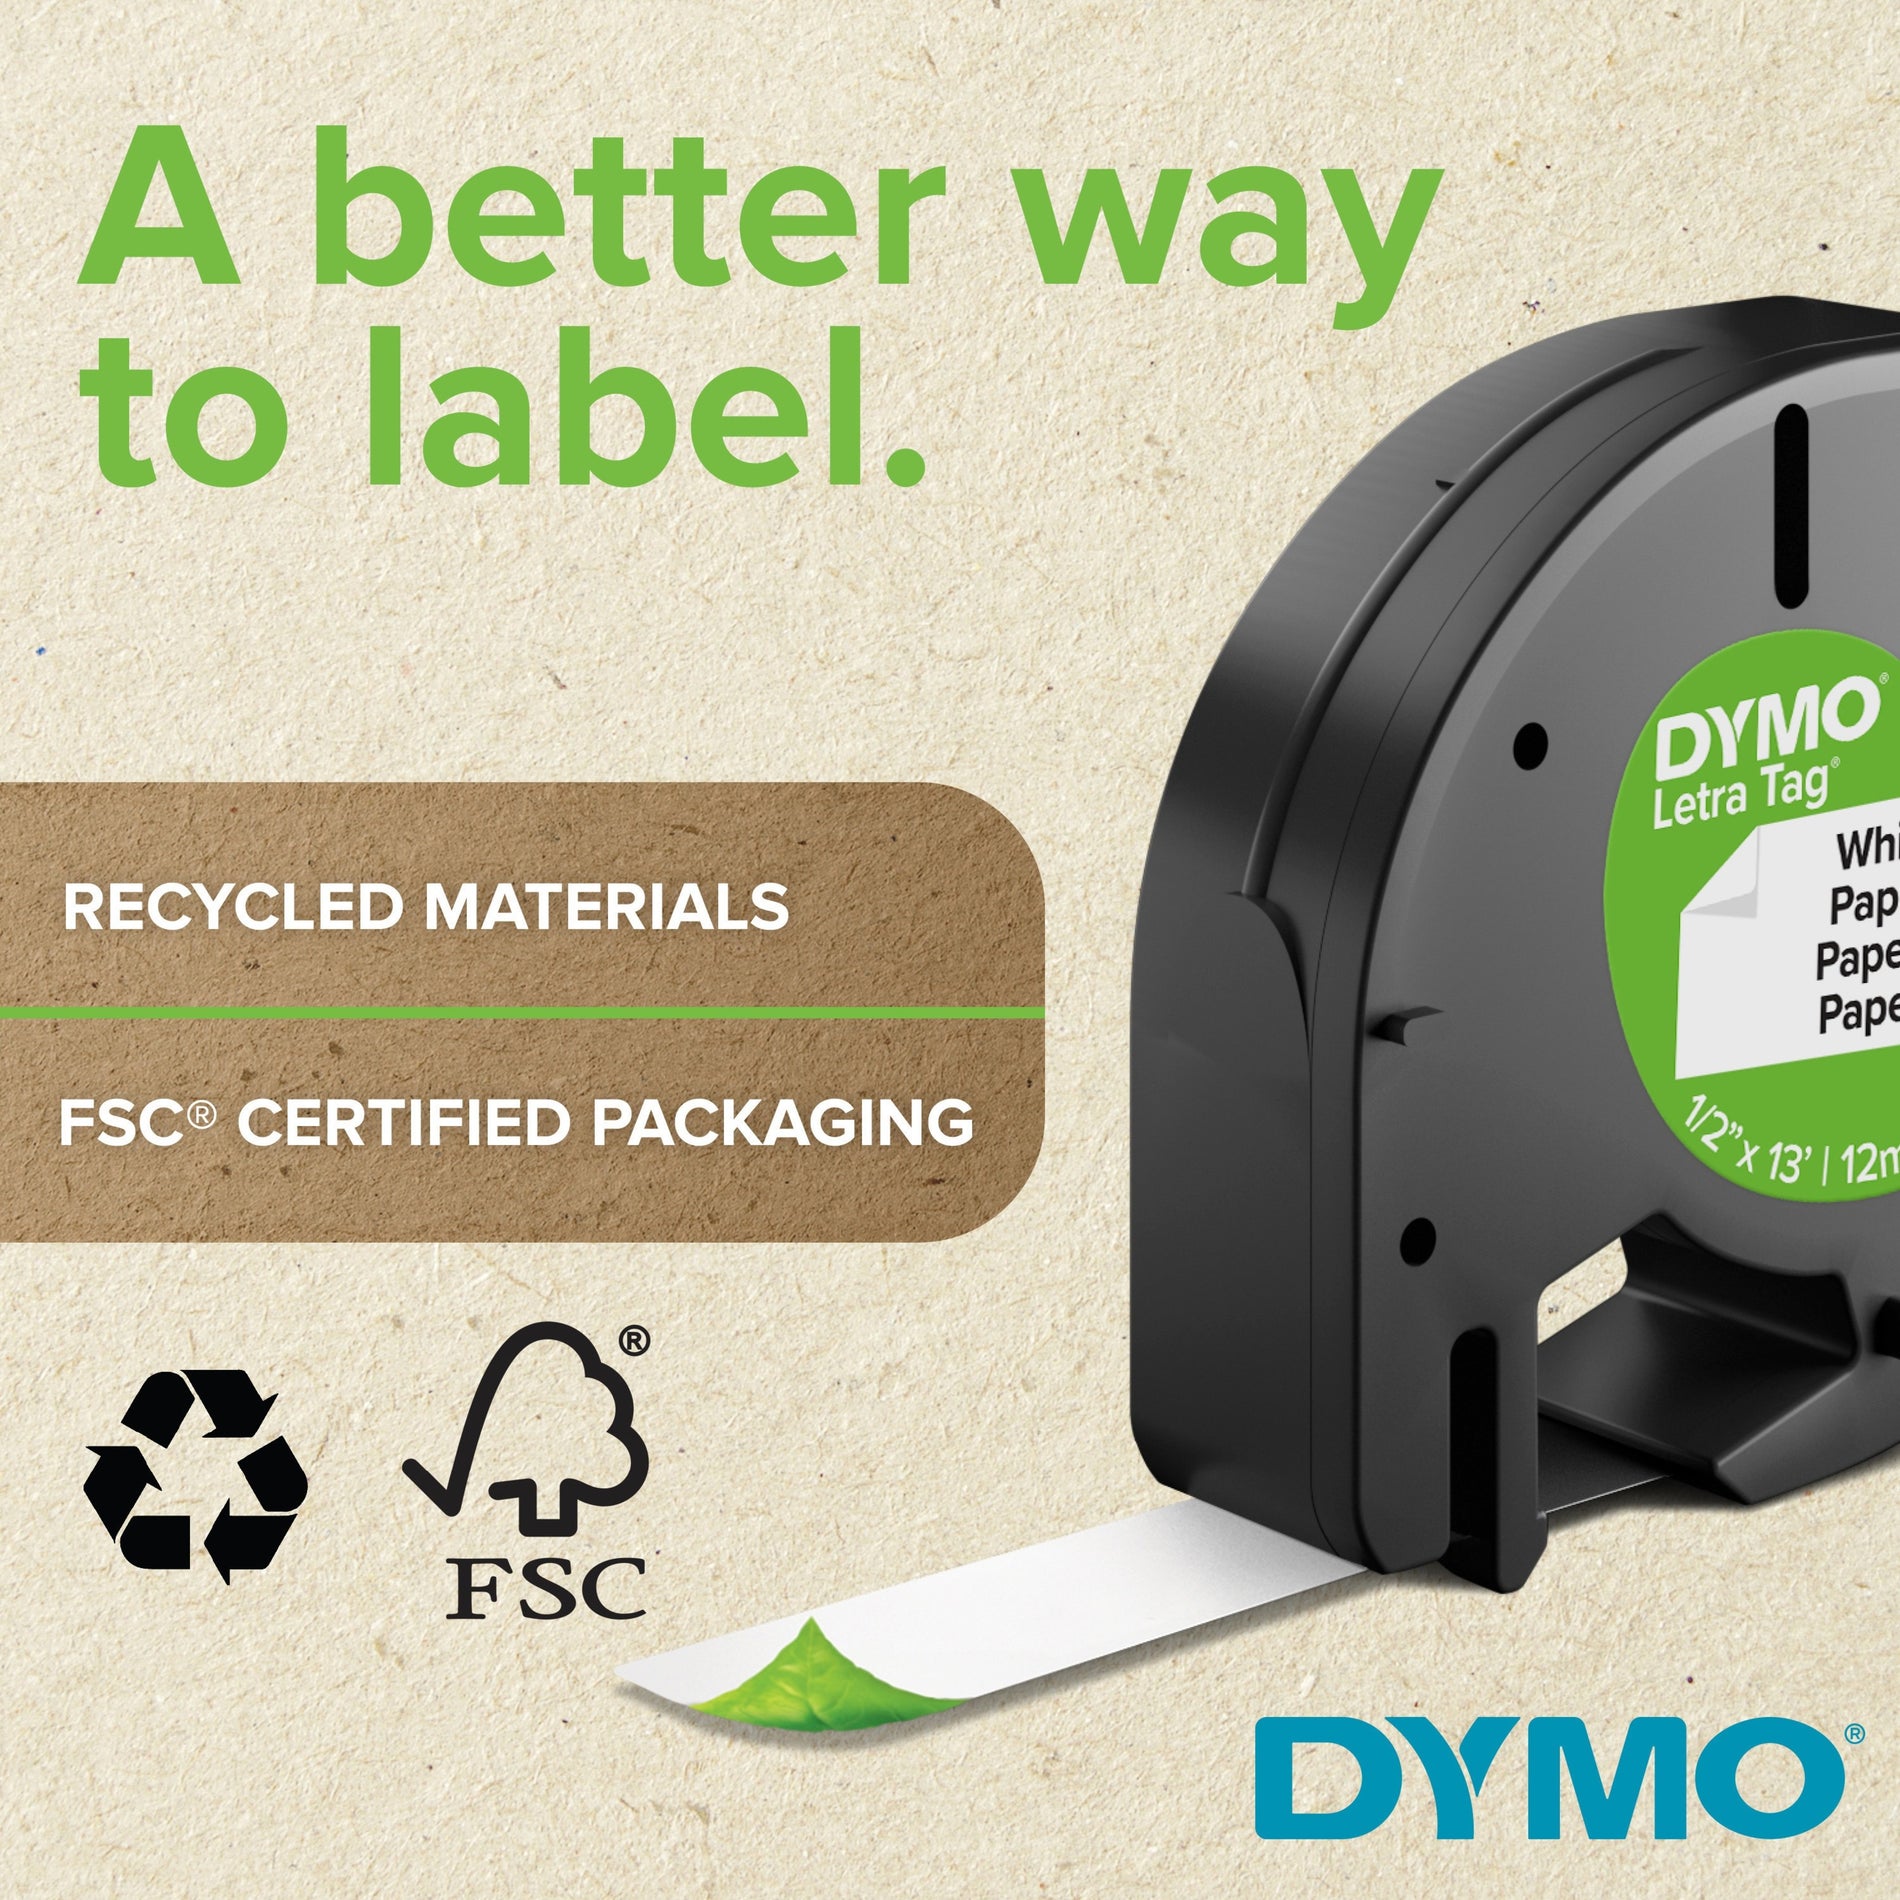 Dymo 1805420 Colored 3/4" Vinyl Label Tape, White/Green, Temperature Resistant, Oil Resistant, Chemical Resistant